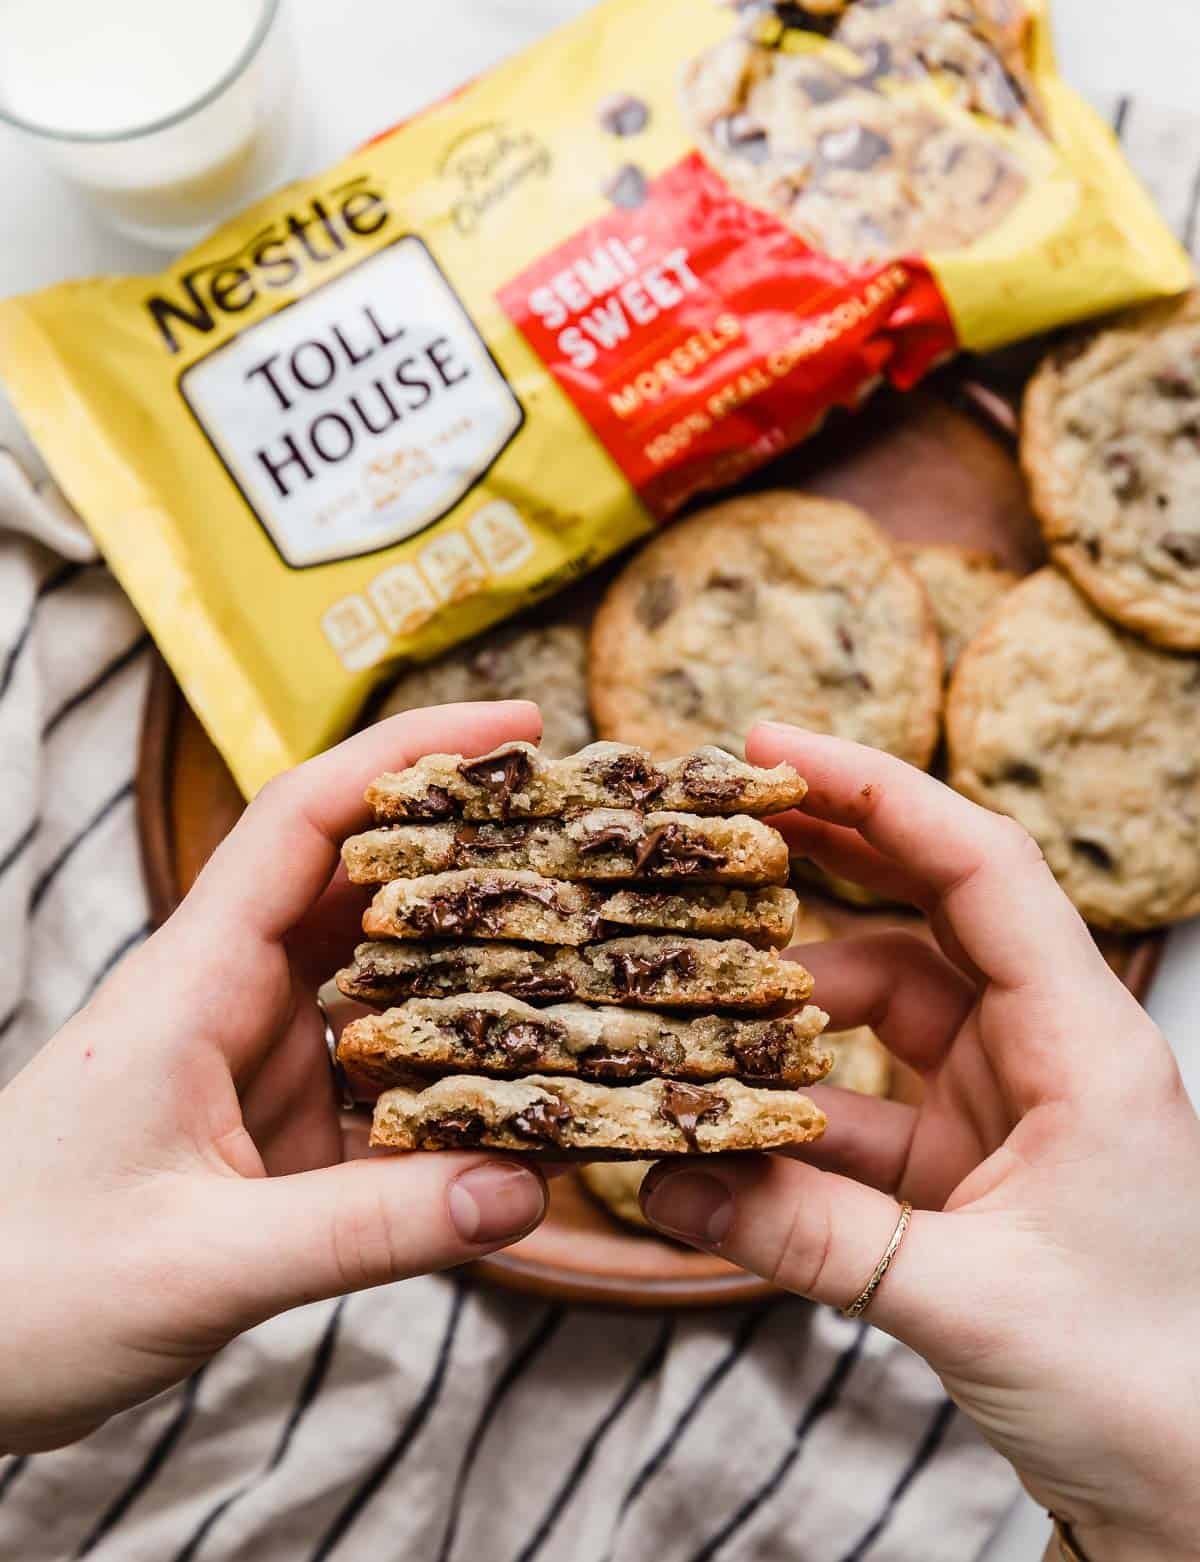 A hand holding a stack of chocolate chip nestle toll house cookies that have been cut in half.